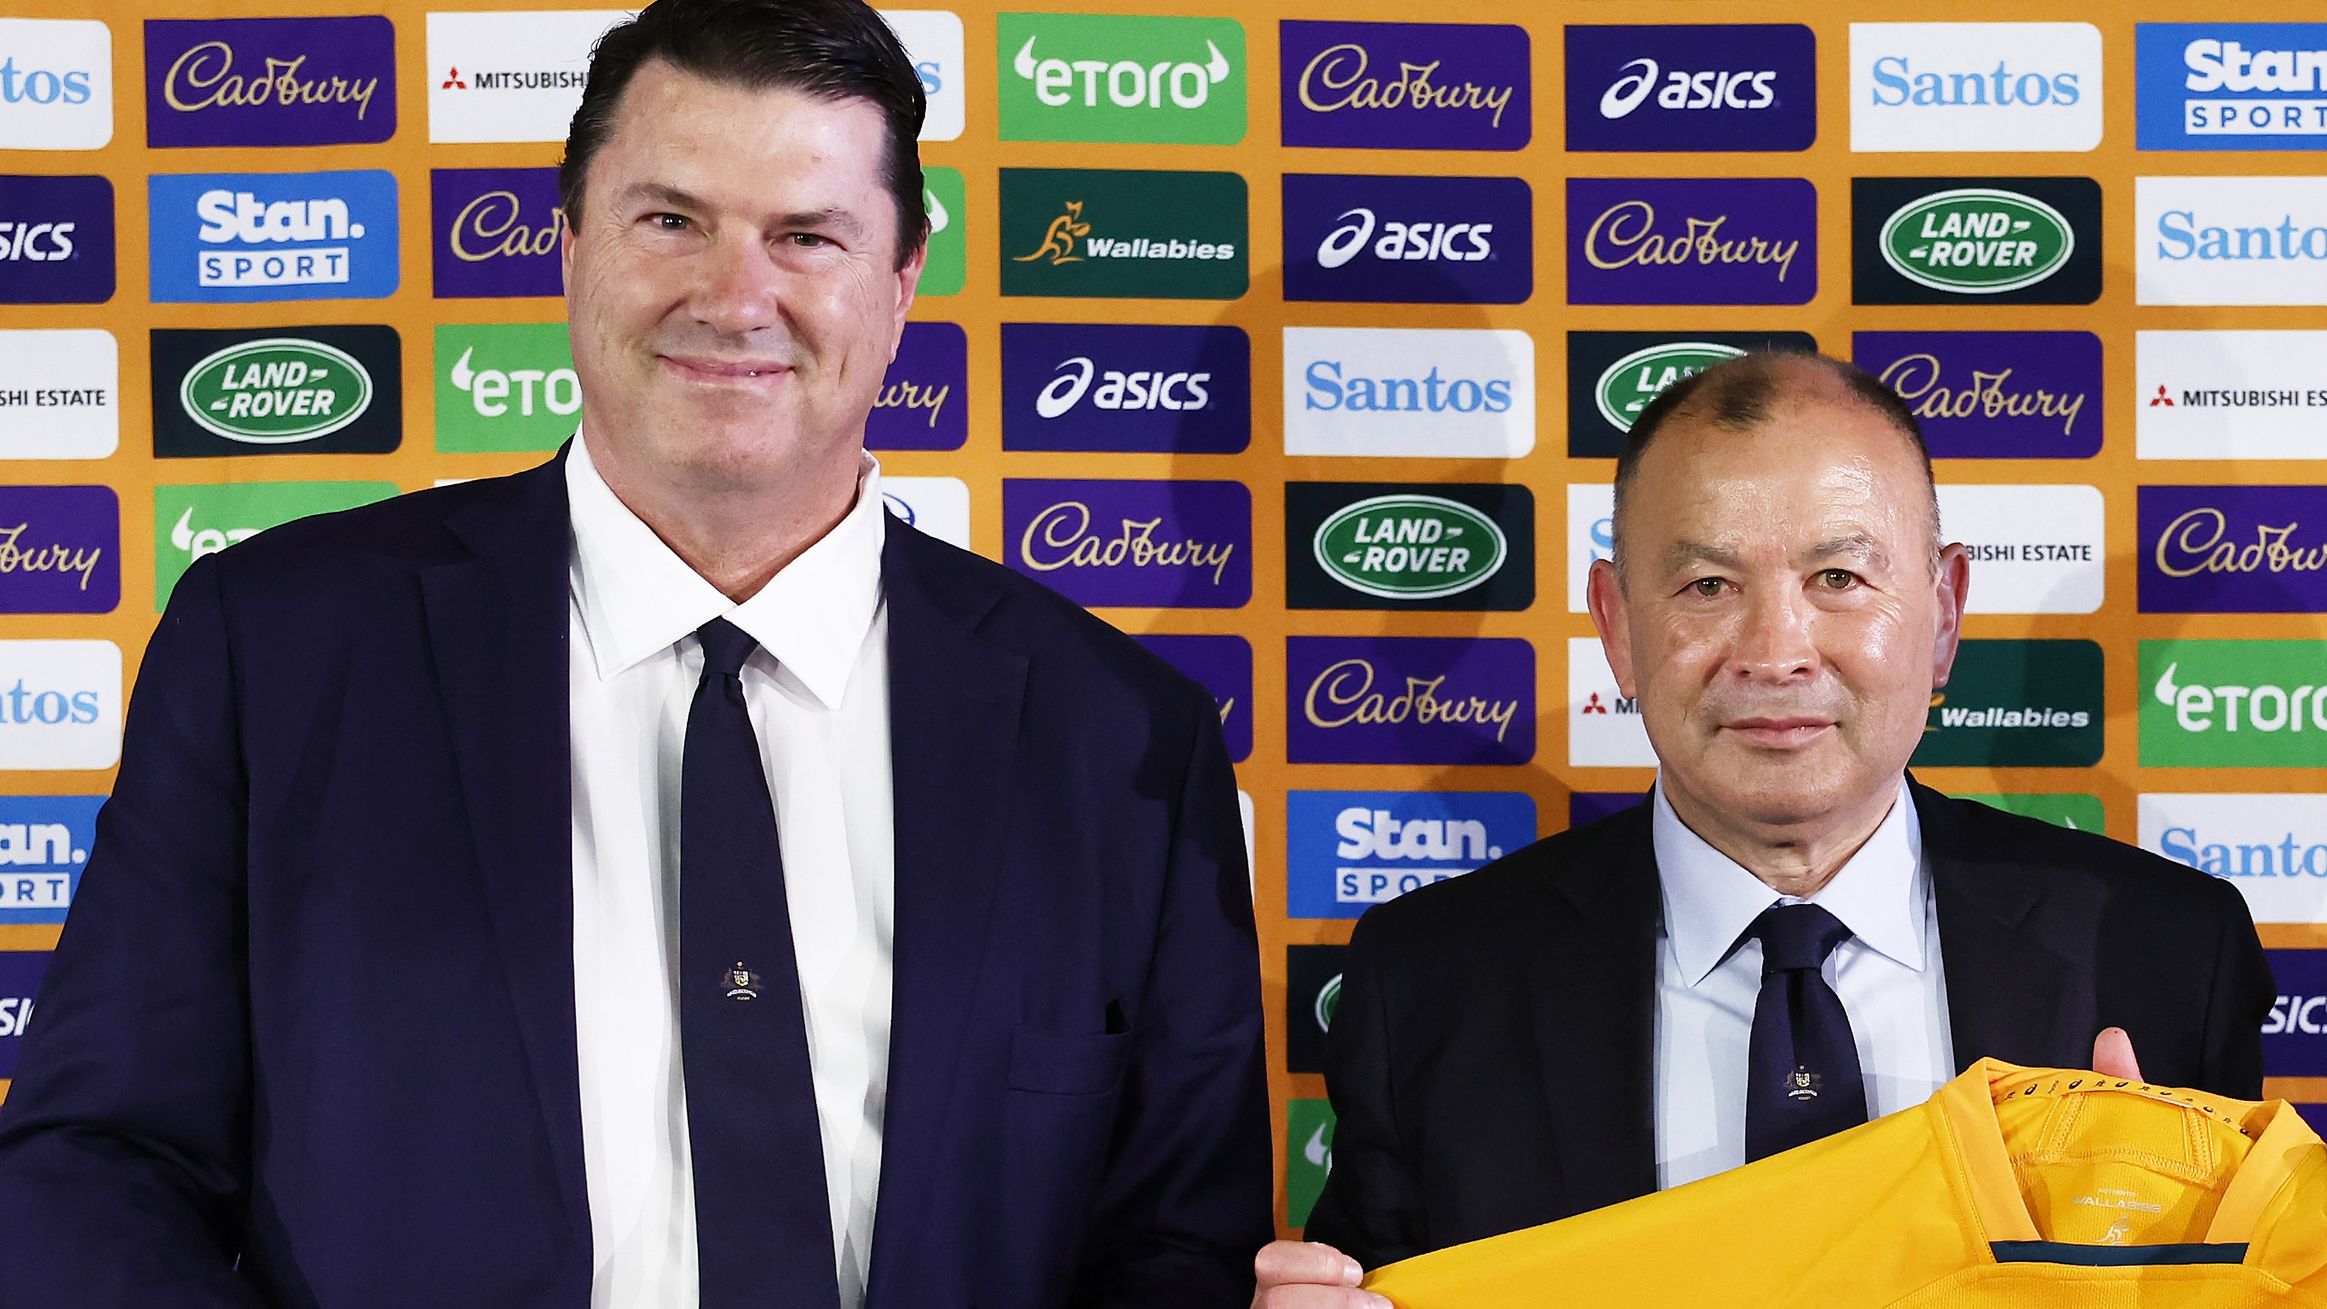 Wallabies coach Eddie Jones (middle) poses alongside Rugby Australia Chairman Hamish McLennan (left) and former Rugby Australia CEO Andy Marinos (right) during a press conference at Matraville Sports High School.